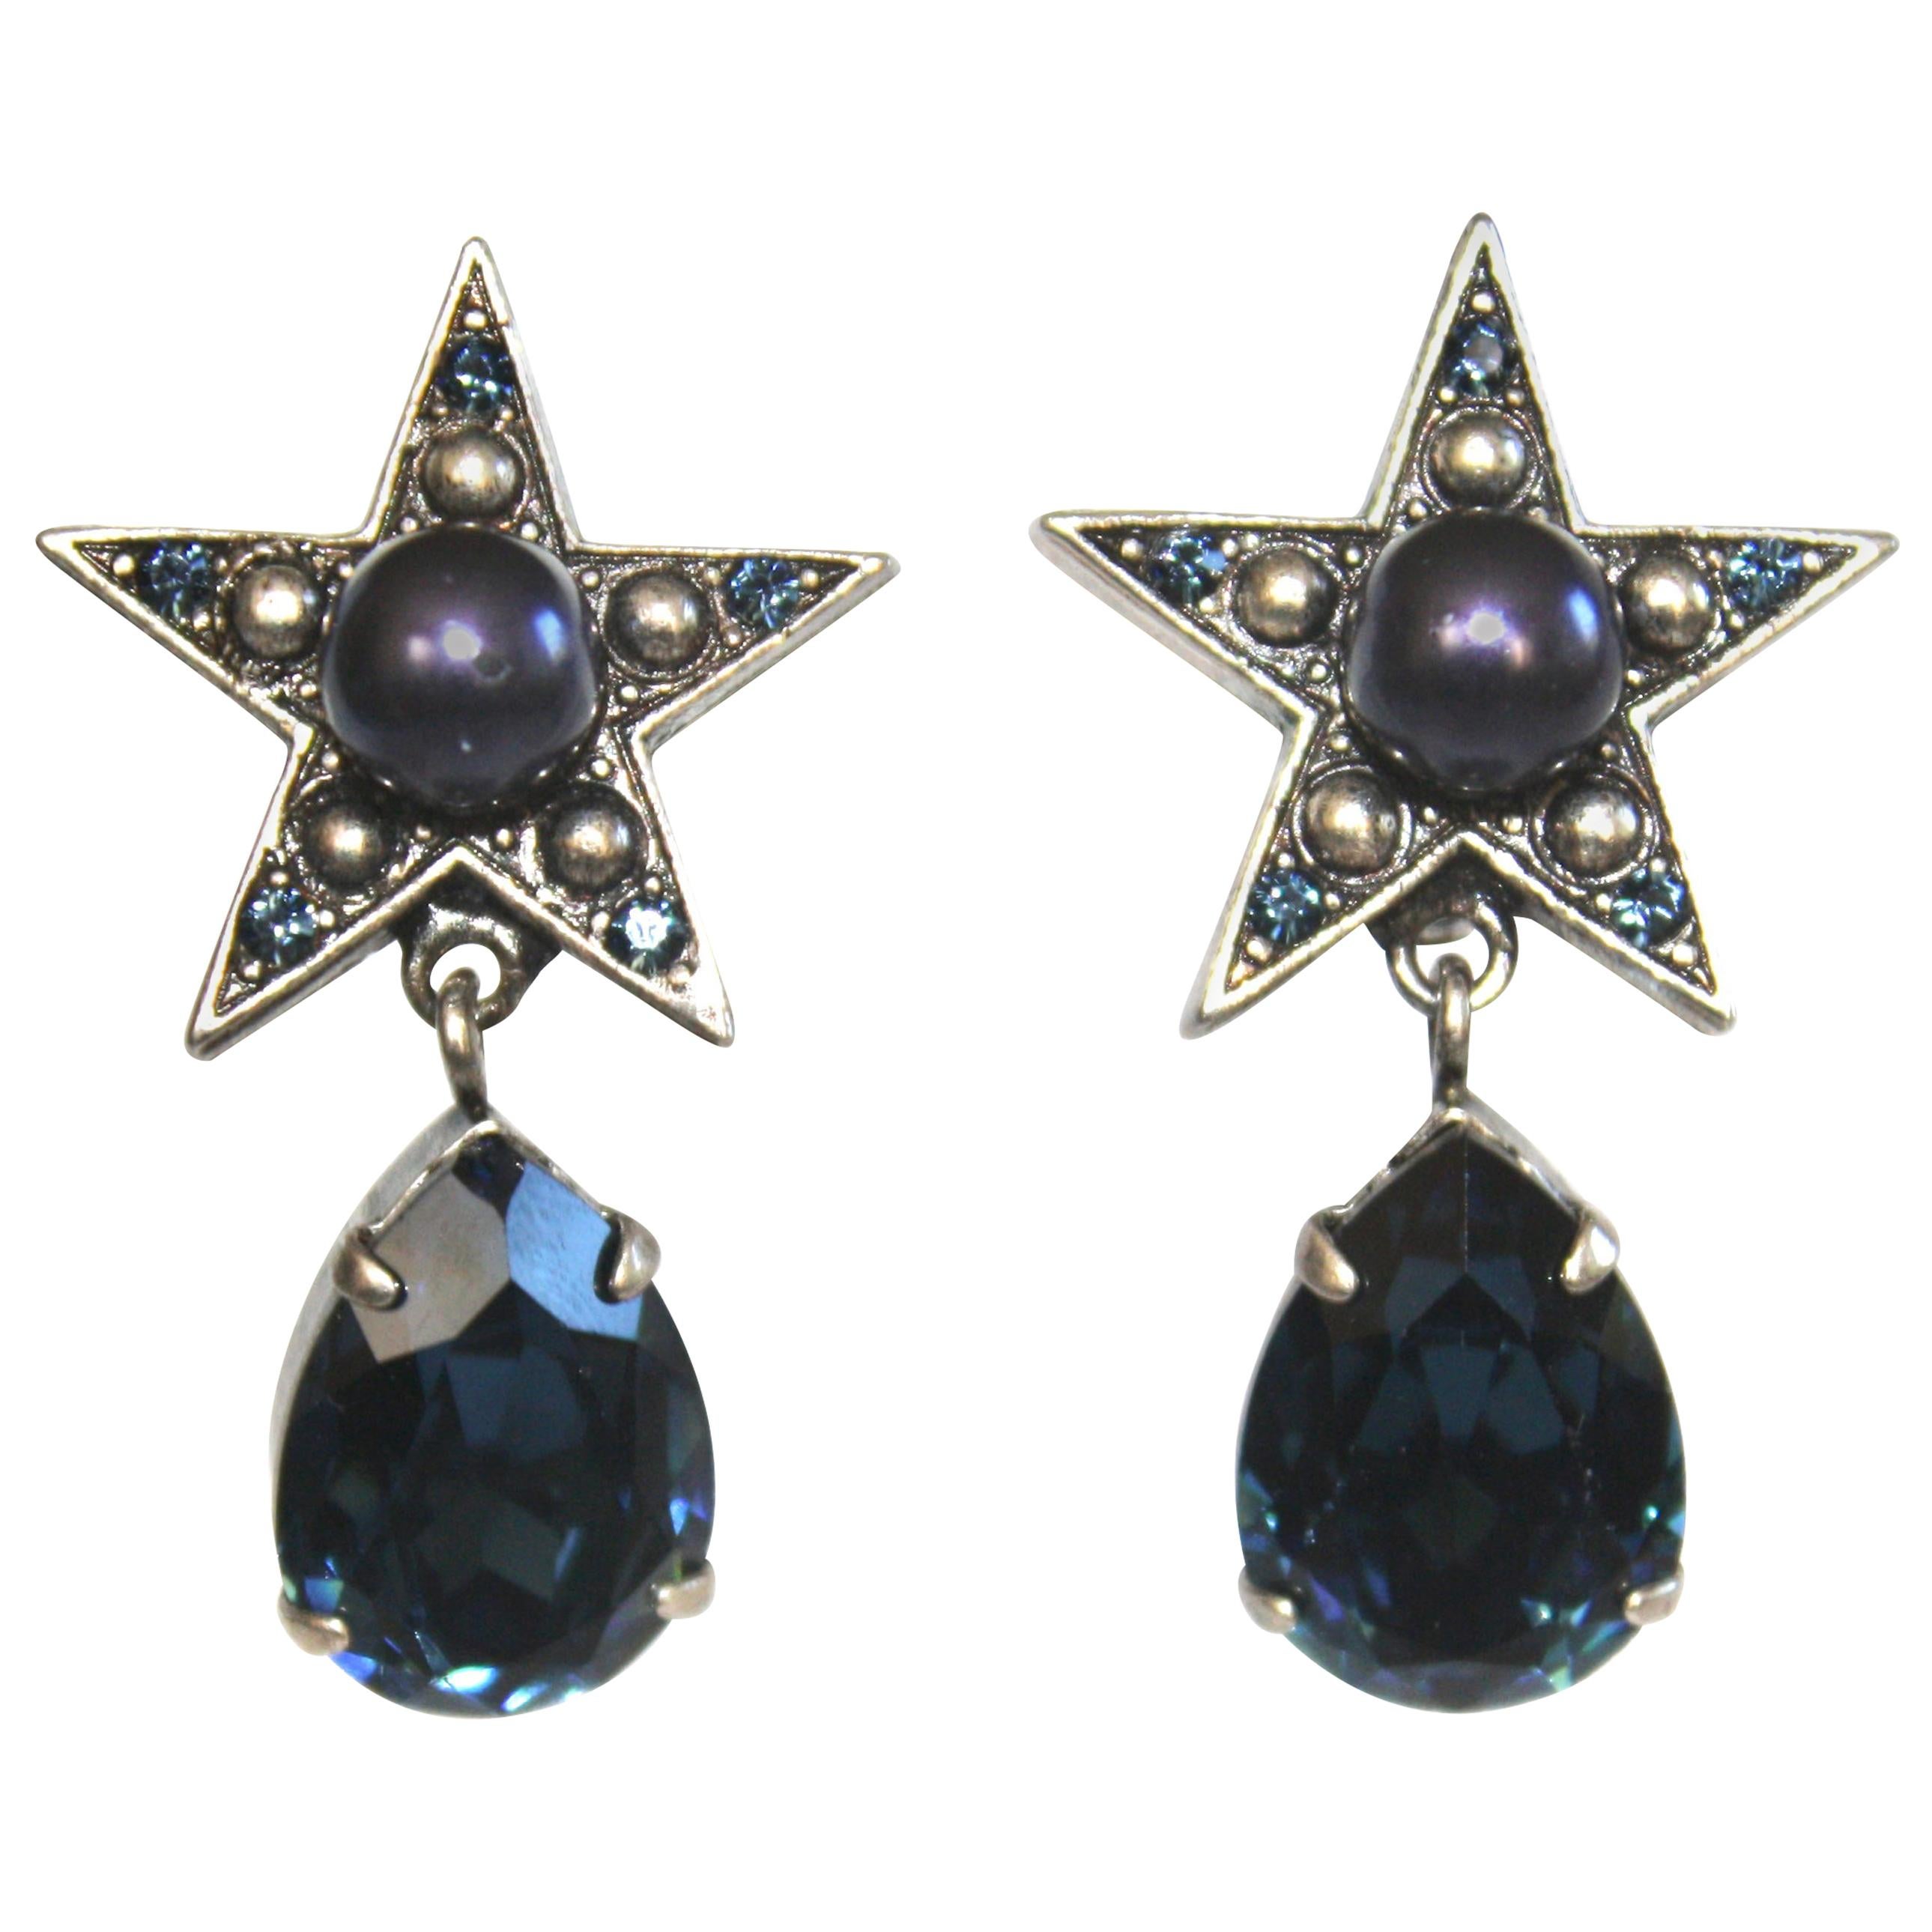 Philippe Ferrandis for Jacques Fath Star Clip Earrings